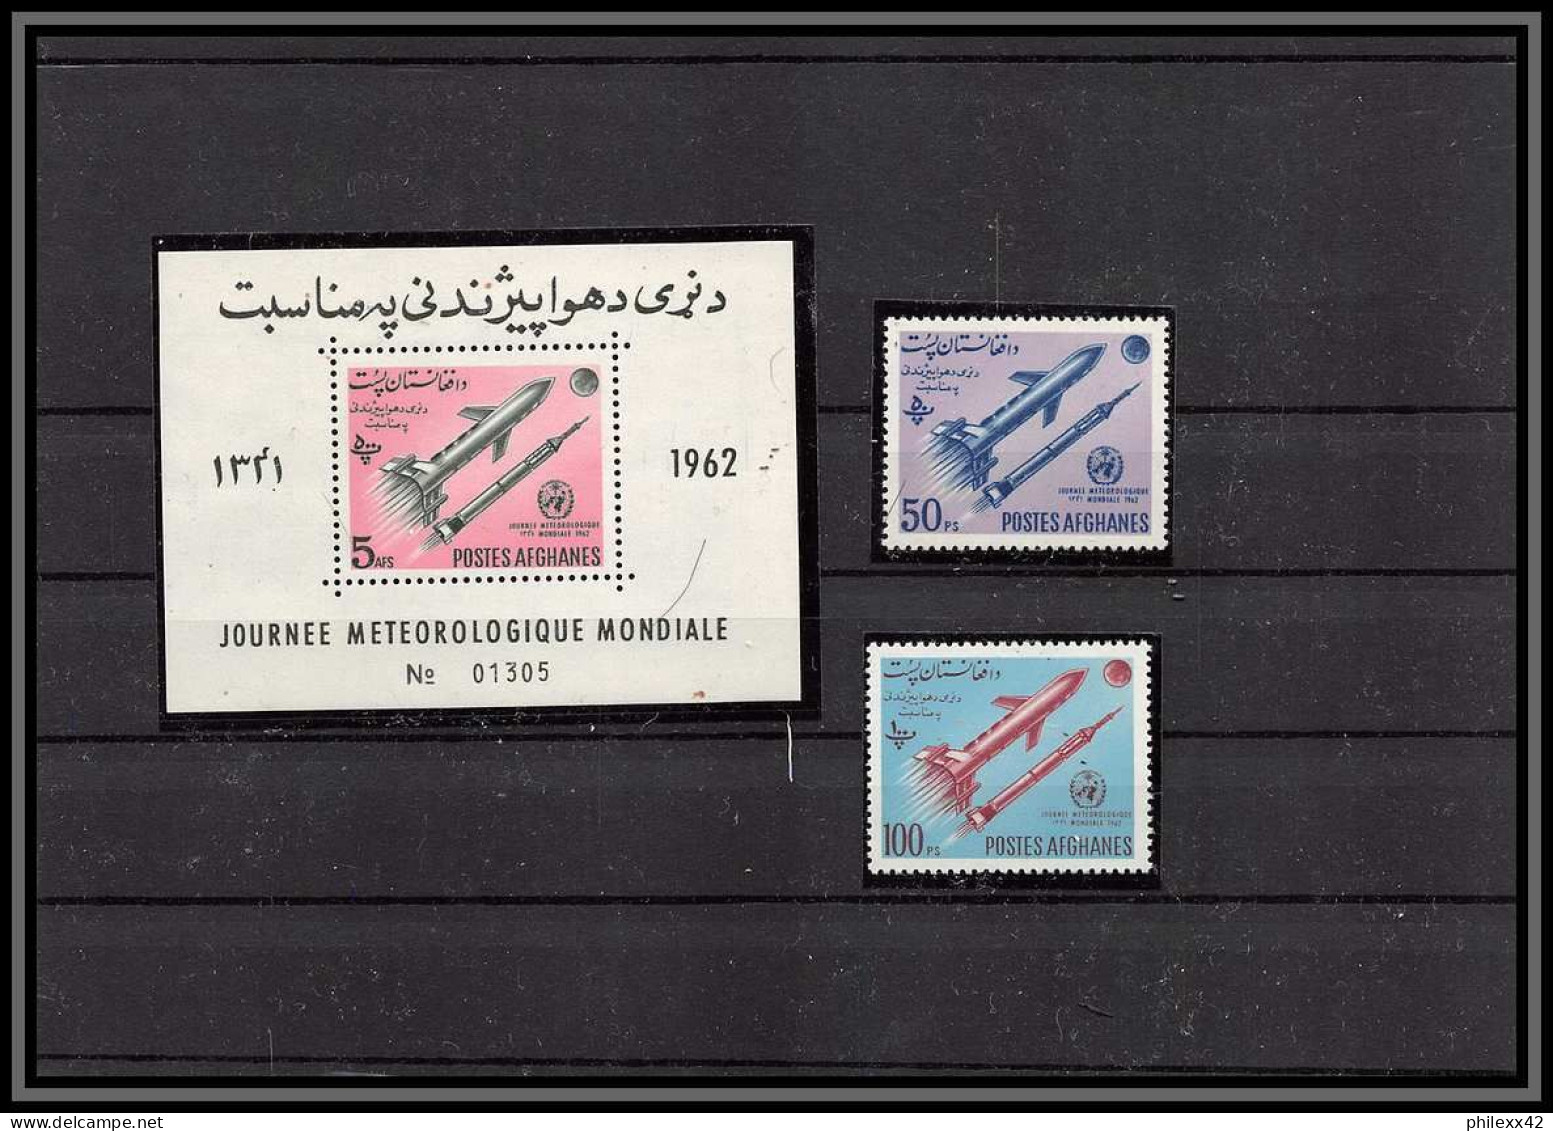 2752 Espace (space) Lettre Cover Afghanistan Postes Afghanes JOURNEE METEOROLOGIQUE MONDIALE Fdc + ** Mnh 693/69 Bloc 33 - Asien